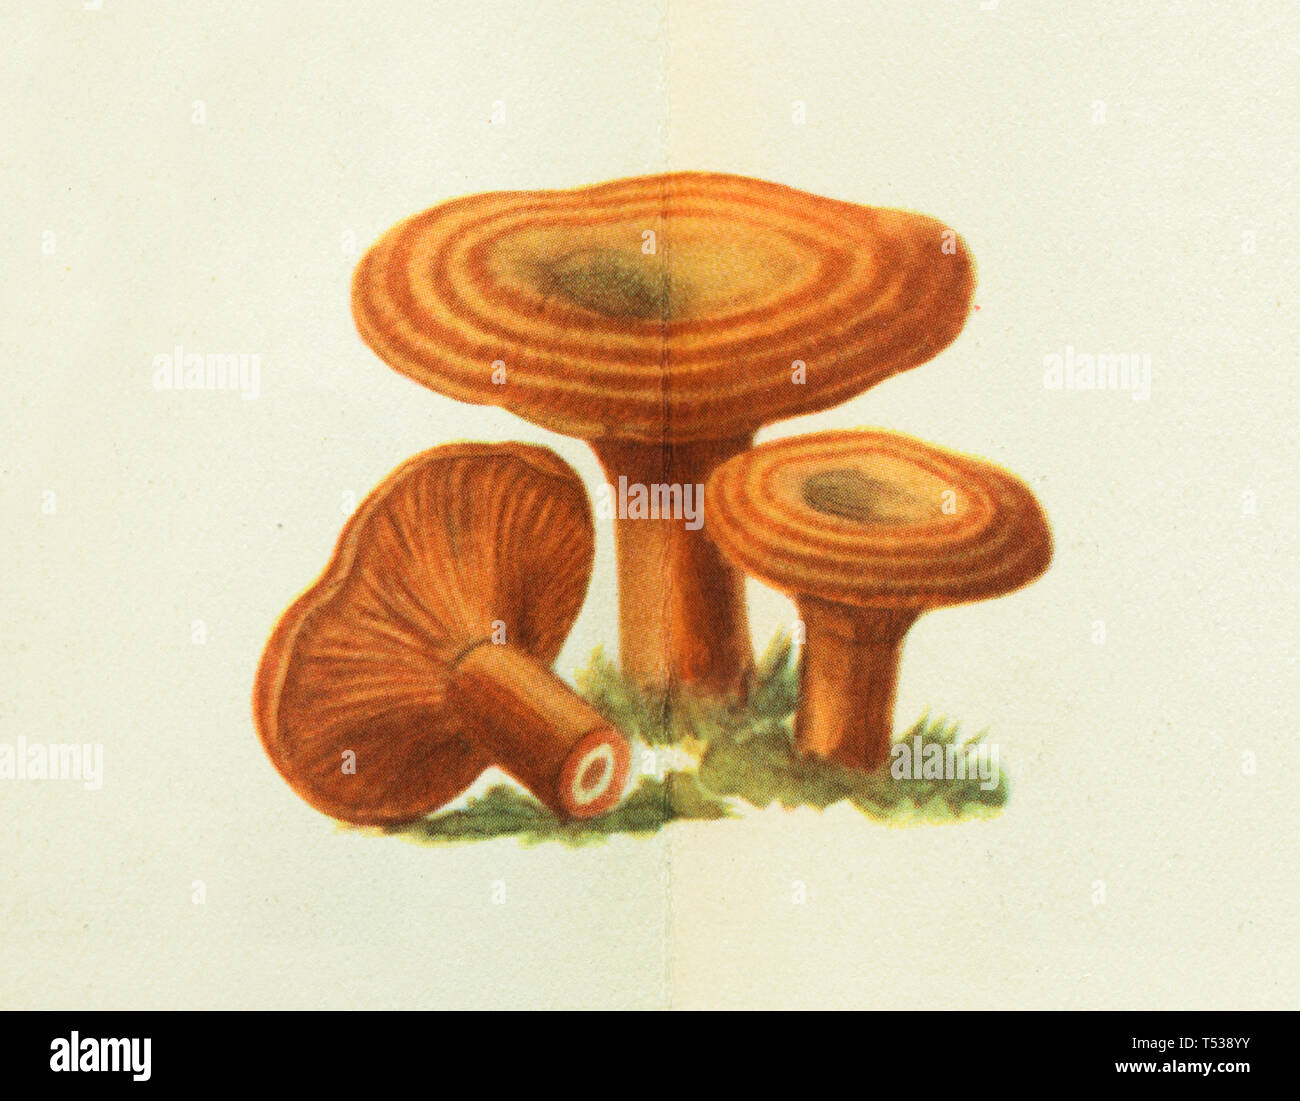 Saffron milk cap mushroom (Lactarius deliciosus) depicted in the colour illustration in the Book of Tasty and Healthy Food published in the Soviet Union (1953). Stock Photo